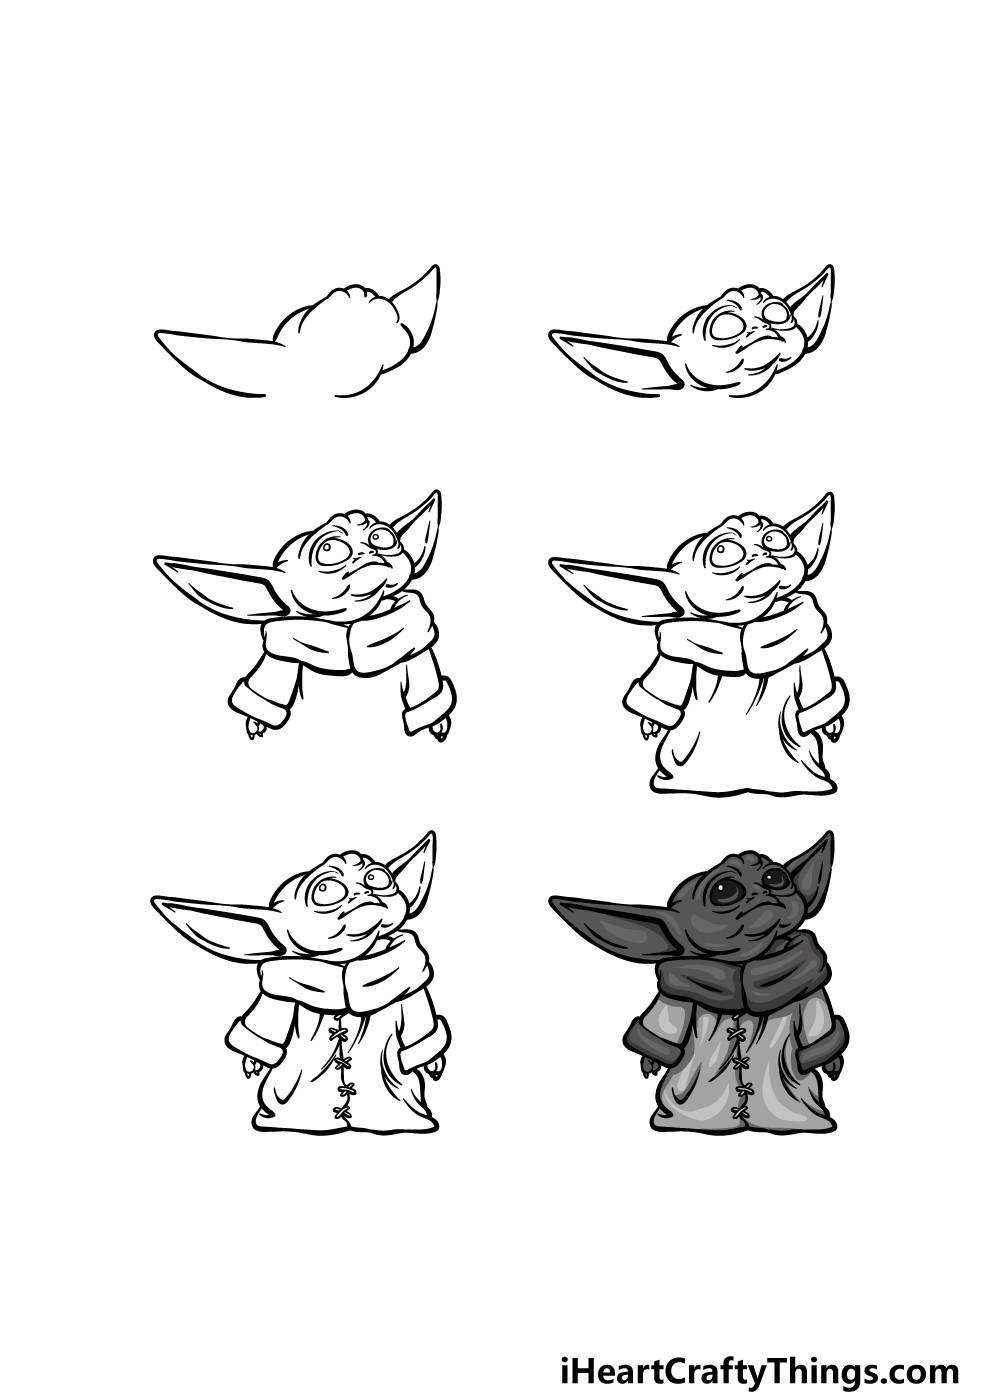 how to draw Baby Yoda in black and white in 6 steps